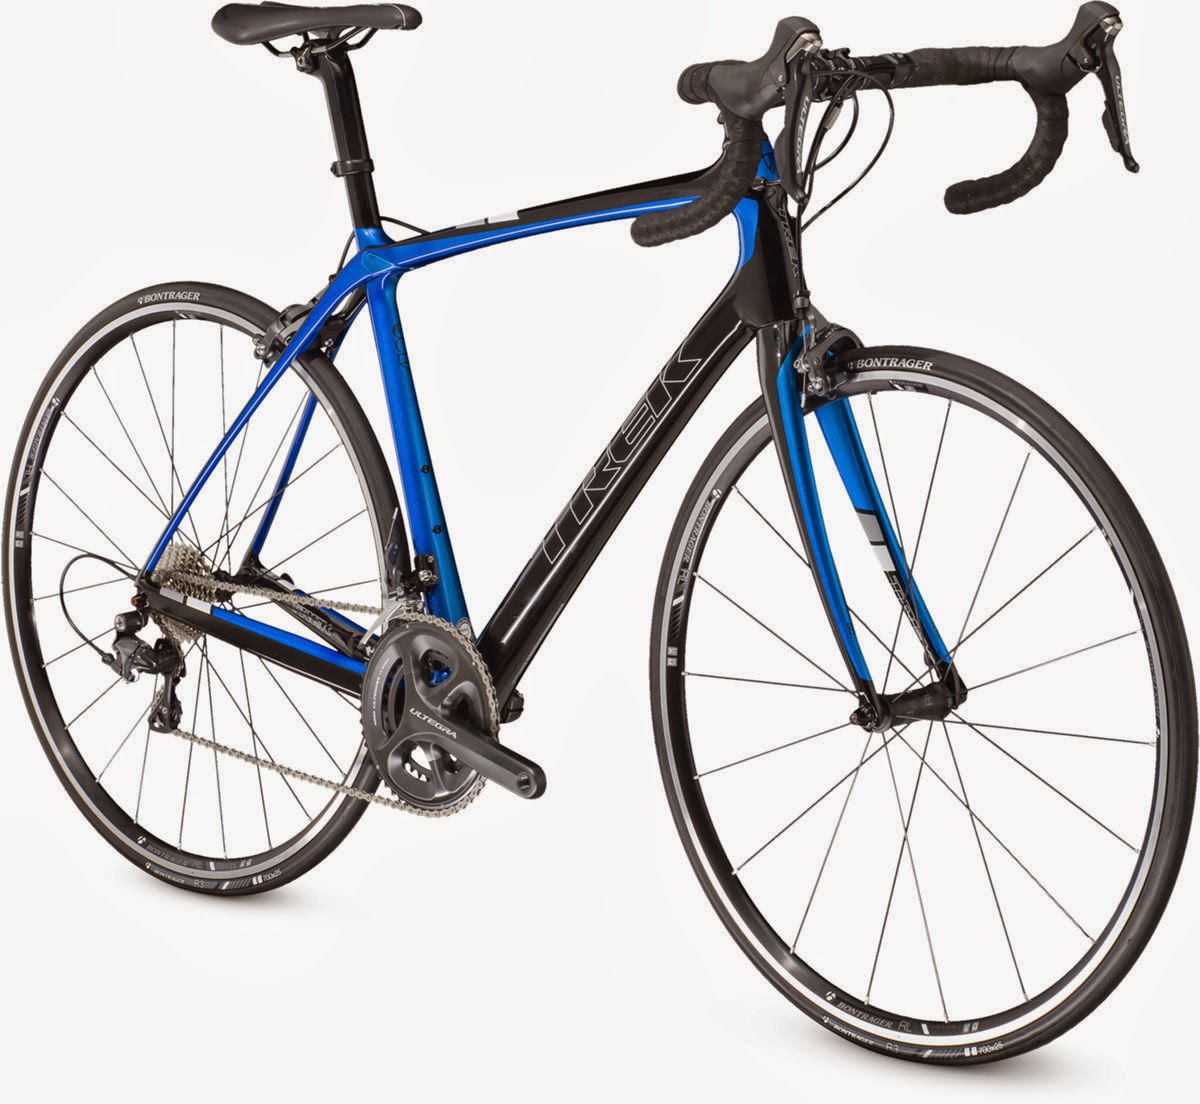 Bumsteads Road and Mountain Bikes: [Review] 2014 Trek 1 Series Road Bikes